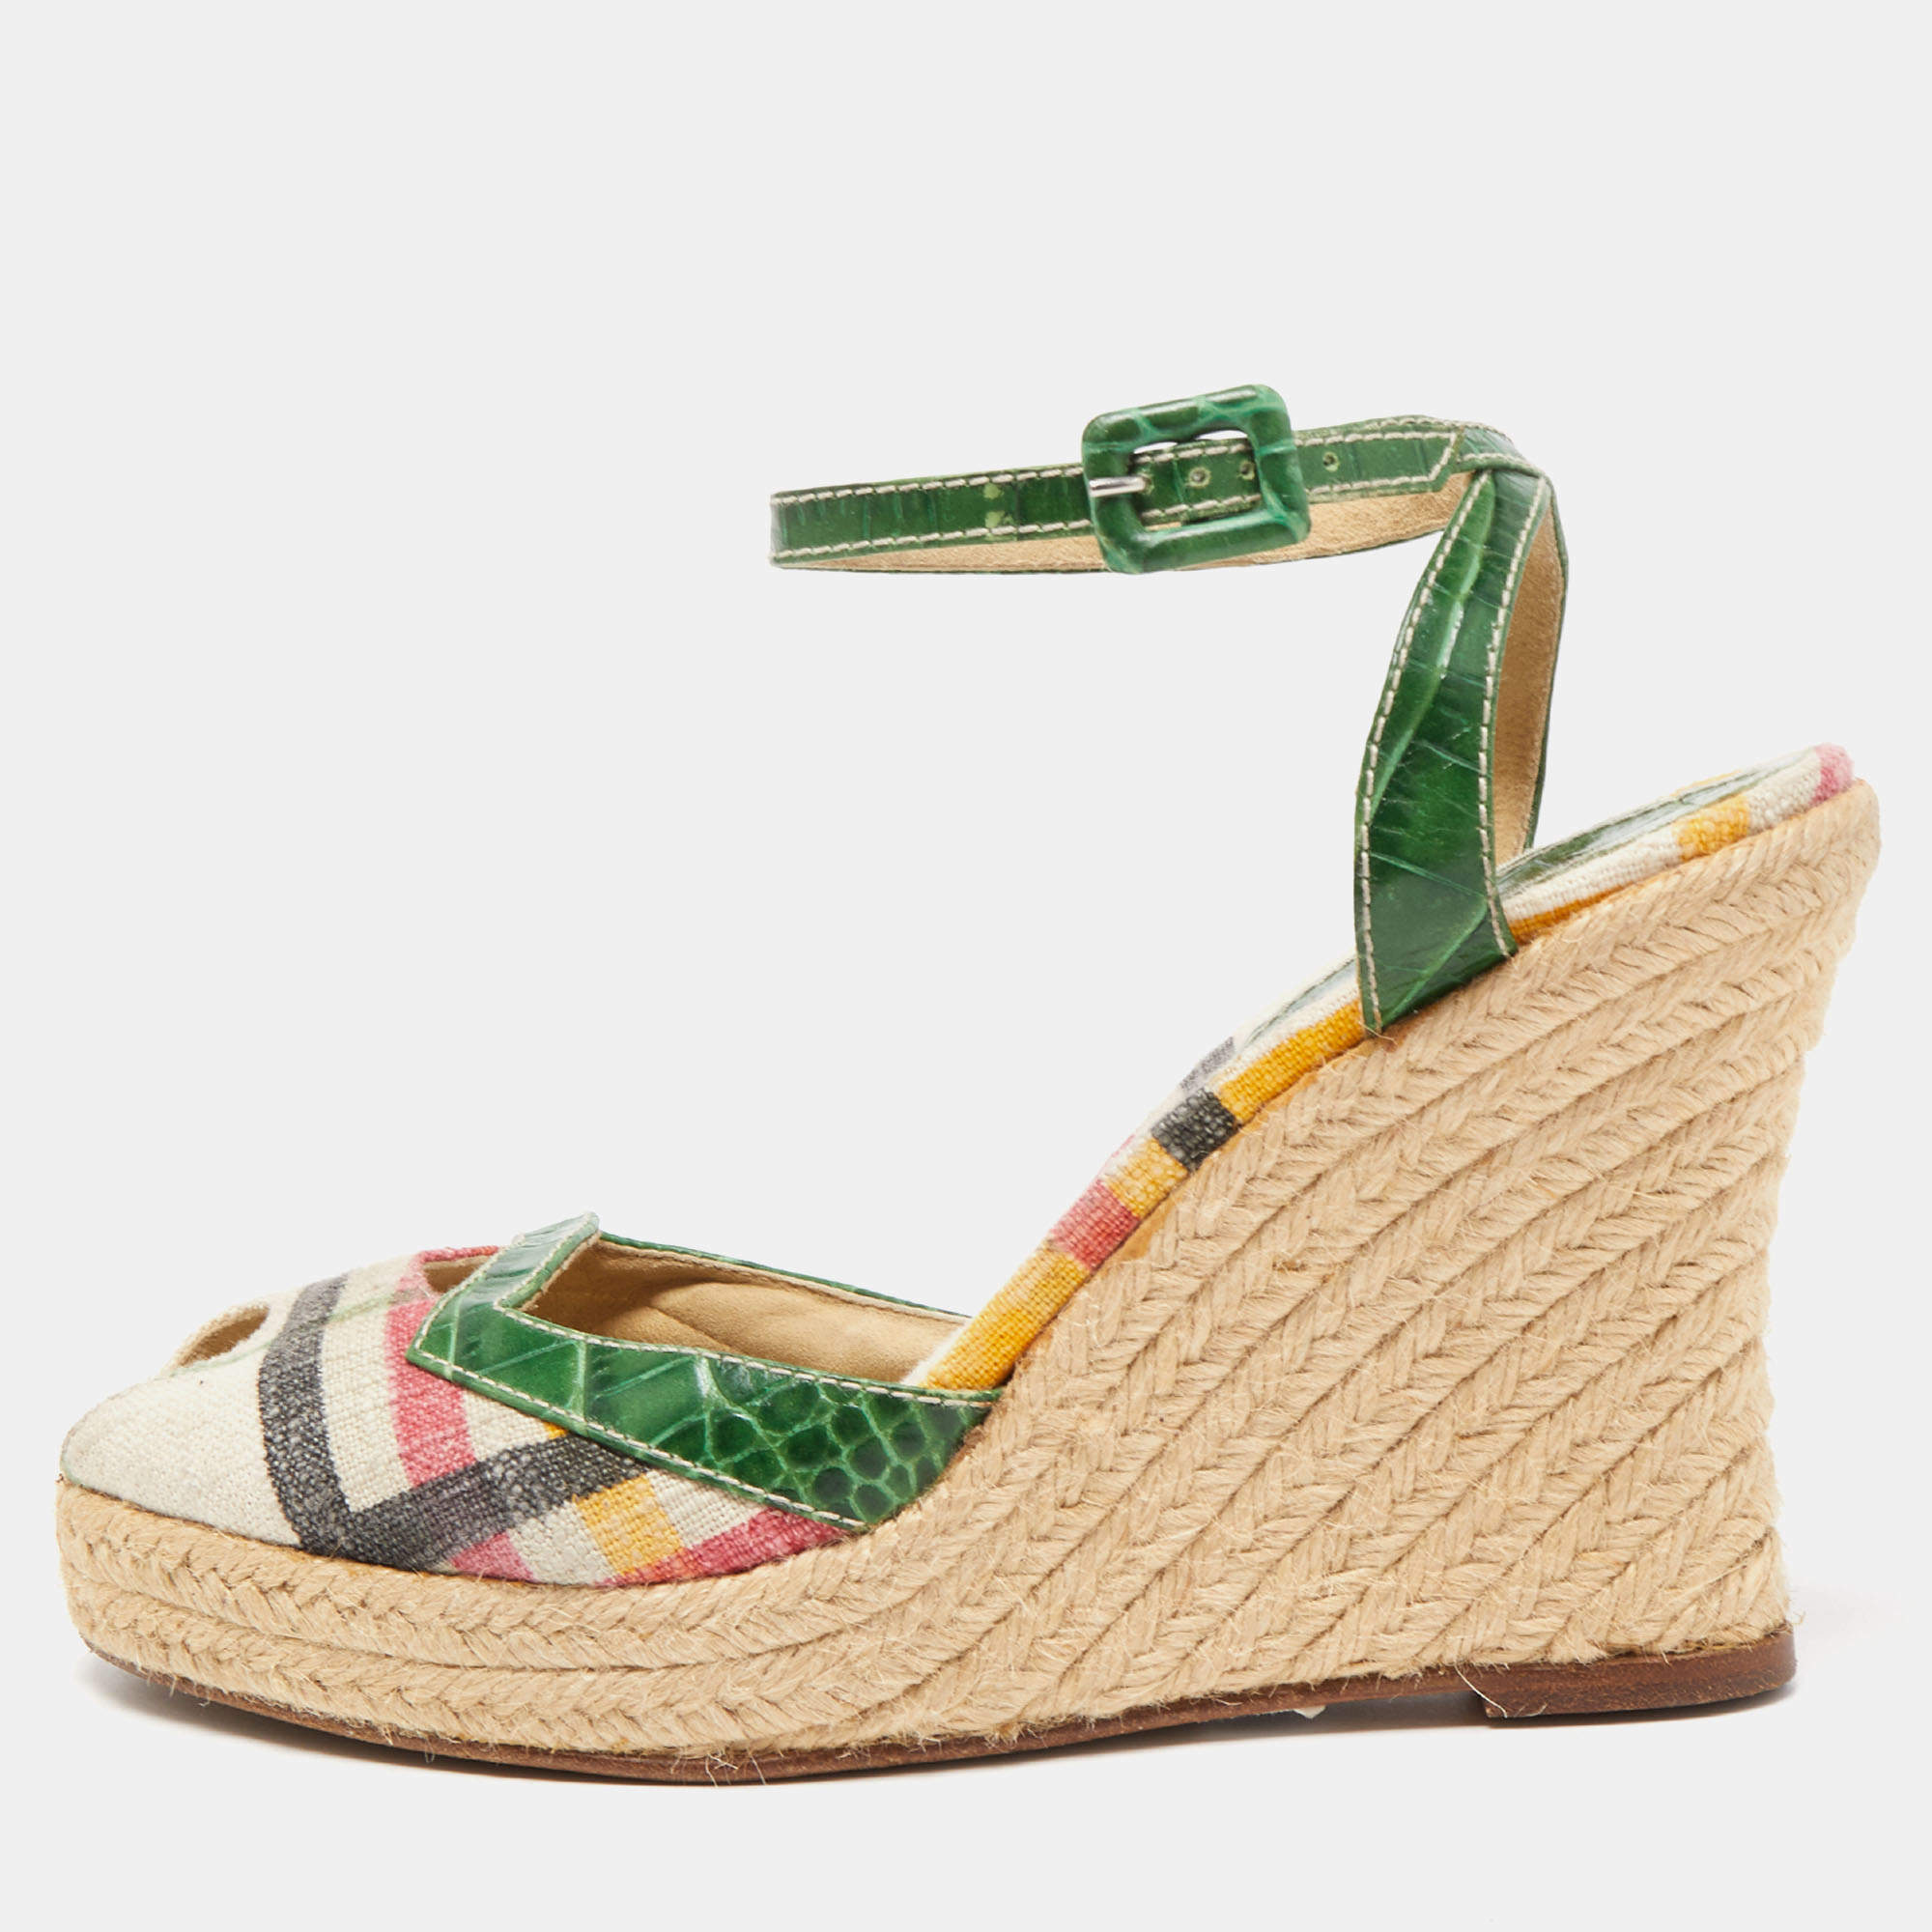 Burberry Multicolor Canvas and Croc Embossed Leather Wedge Sandals Size 40